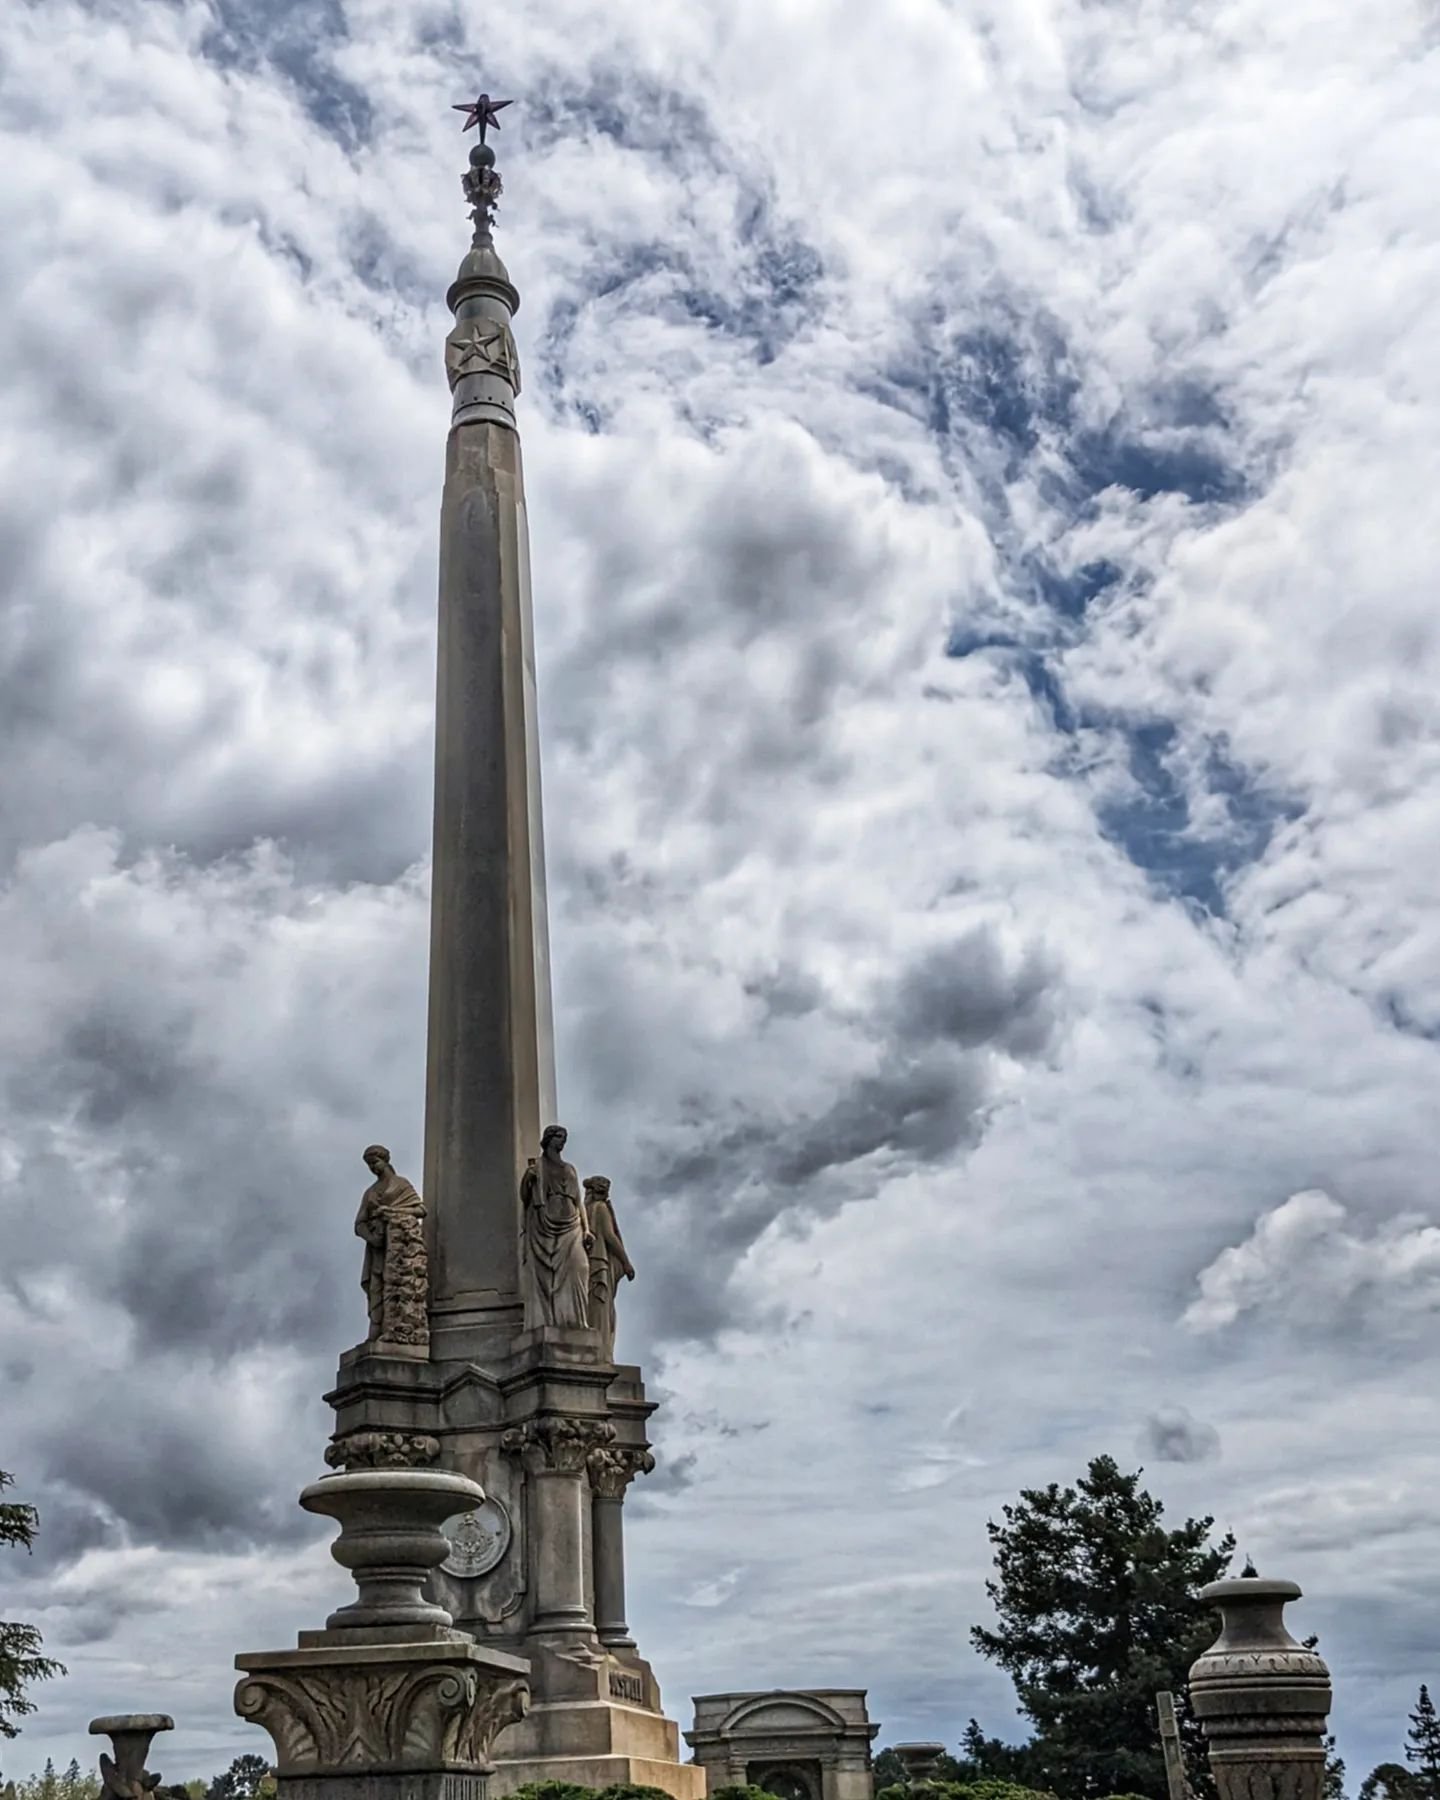 Cogswell monument on a cloudy day at the Mountain View Cemetery in Oakland. Henry Cogswell was a dentist to miners during the Gold Rush, and the four statues represent Faith, Hope, Charity and Temperance. He and his wife founded Cogswell College, whi